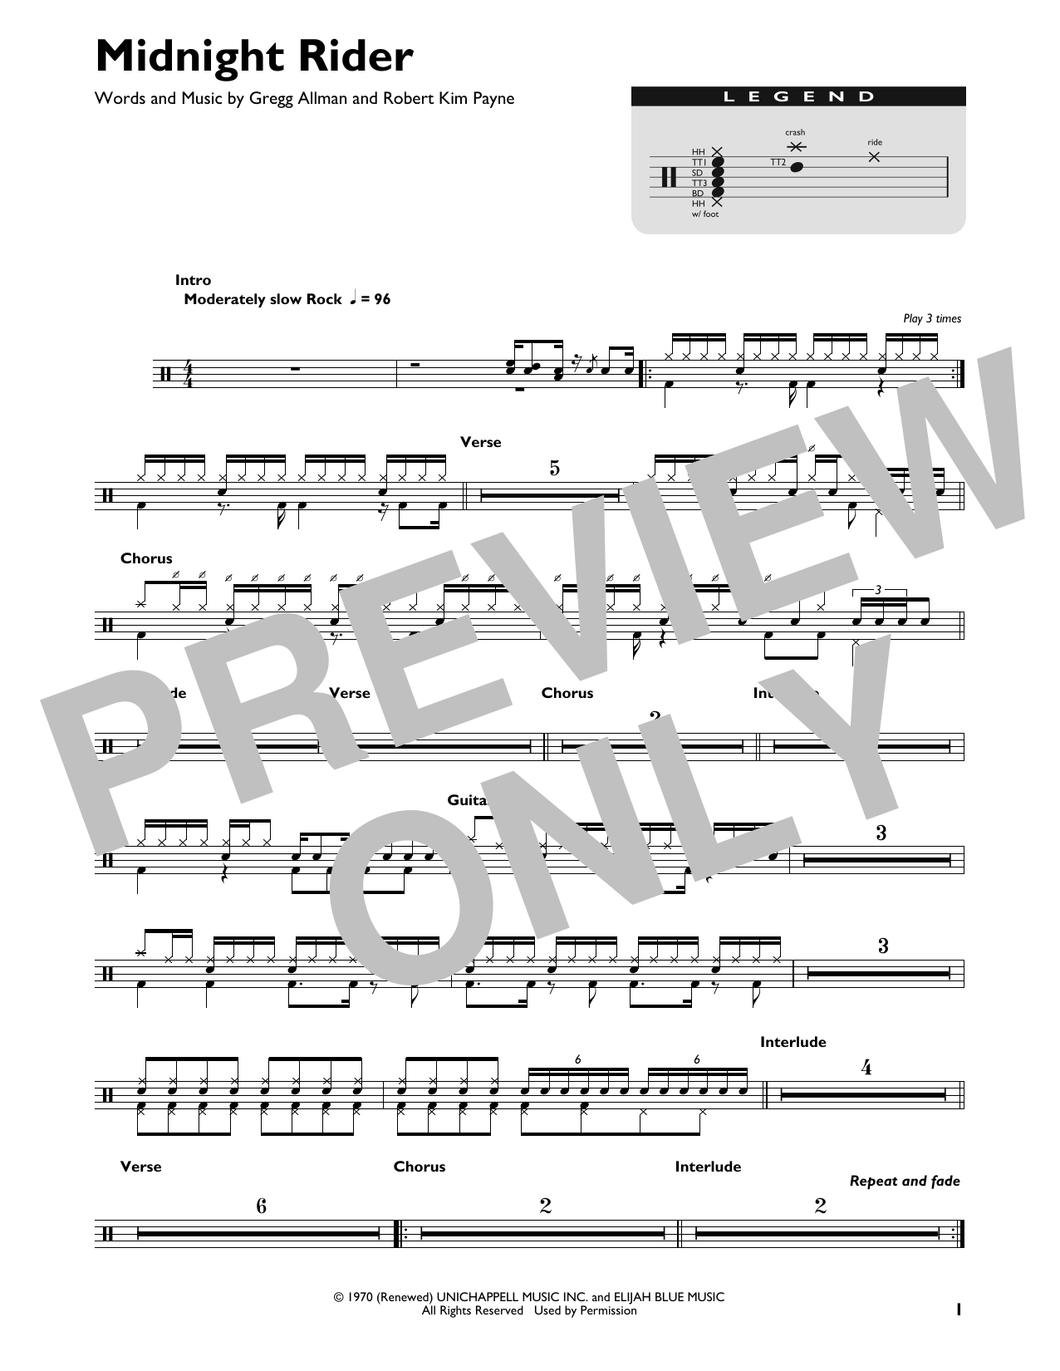 Midnight Rider - The Allman Brothers Band - Full Drum Transcription / Drum Sheet Music - SheetMusicDirect DT